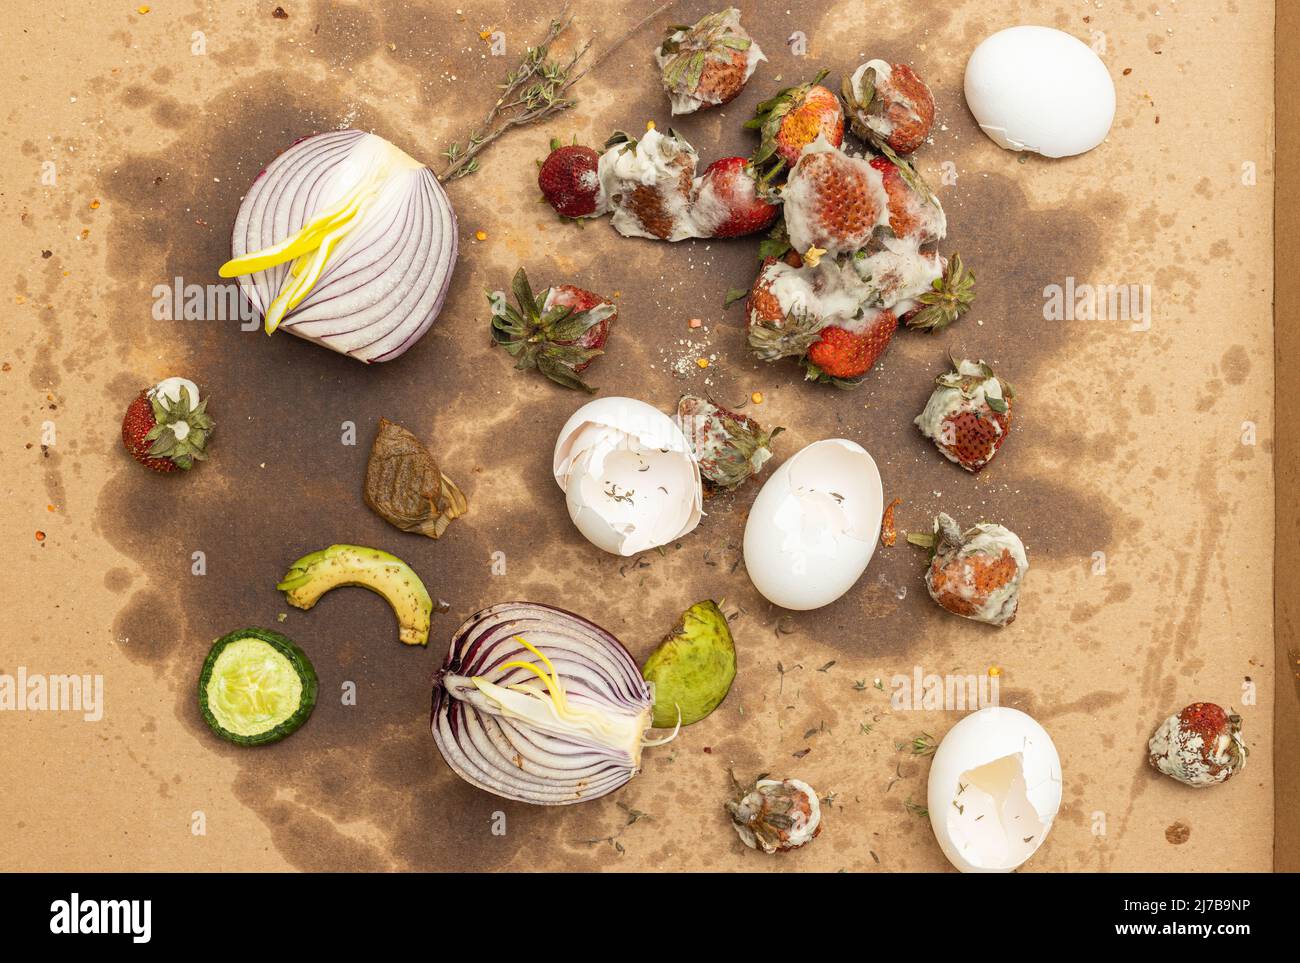 Top view of rotten food leftovers on soiled cardboard. Rotten fruit, vegetables and eggshells thrown for composting. Food waste concept. Stock Photo